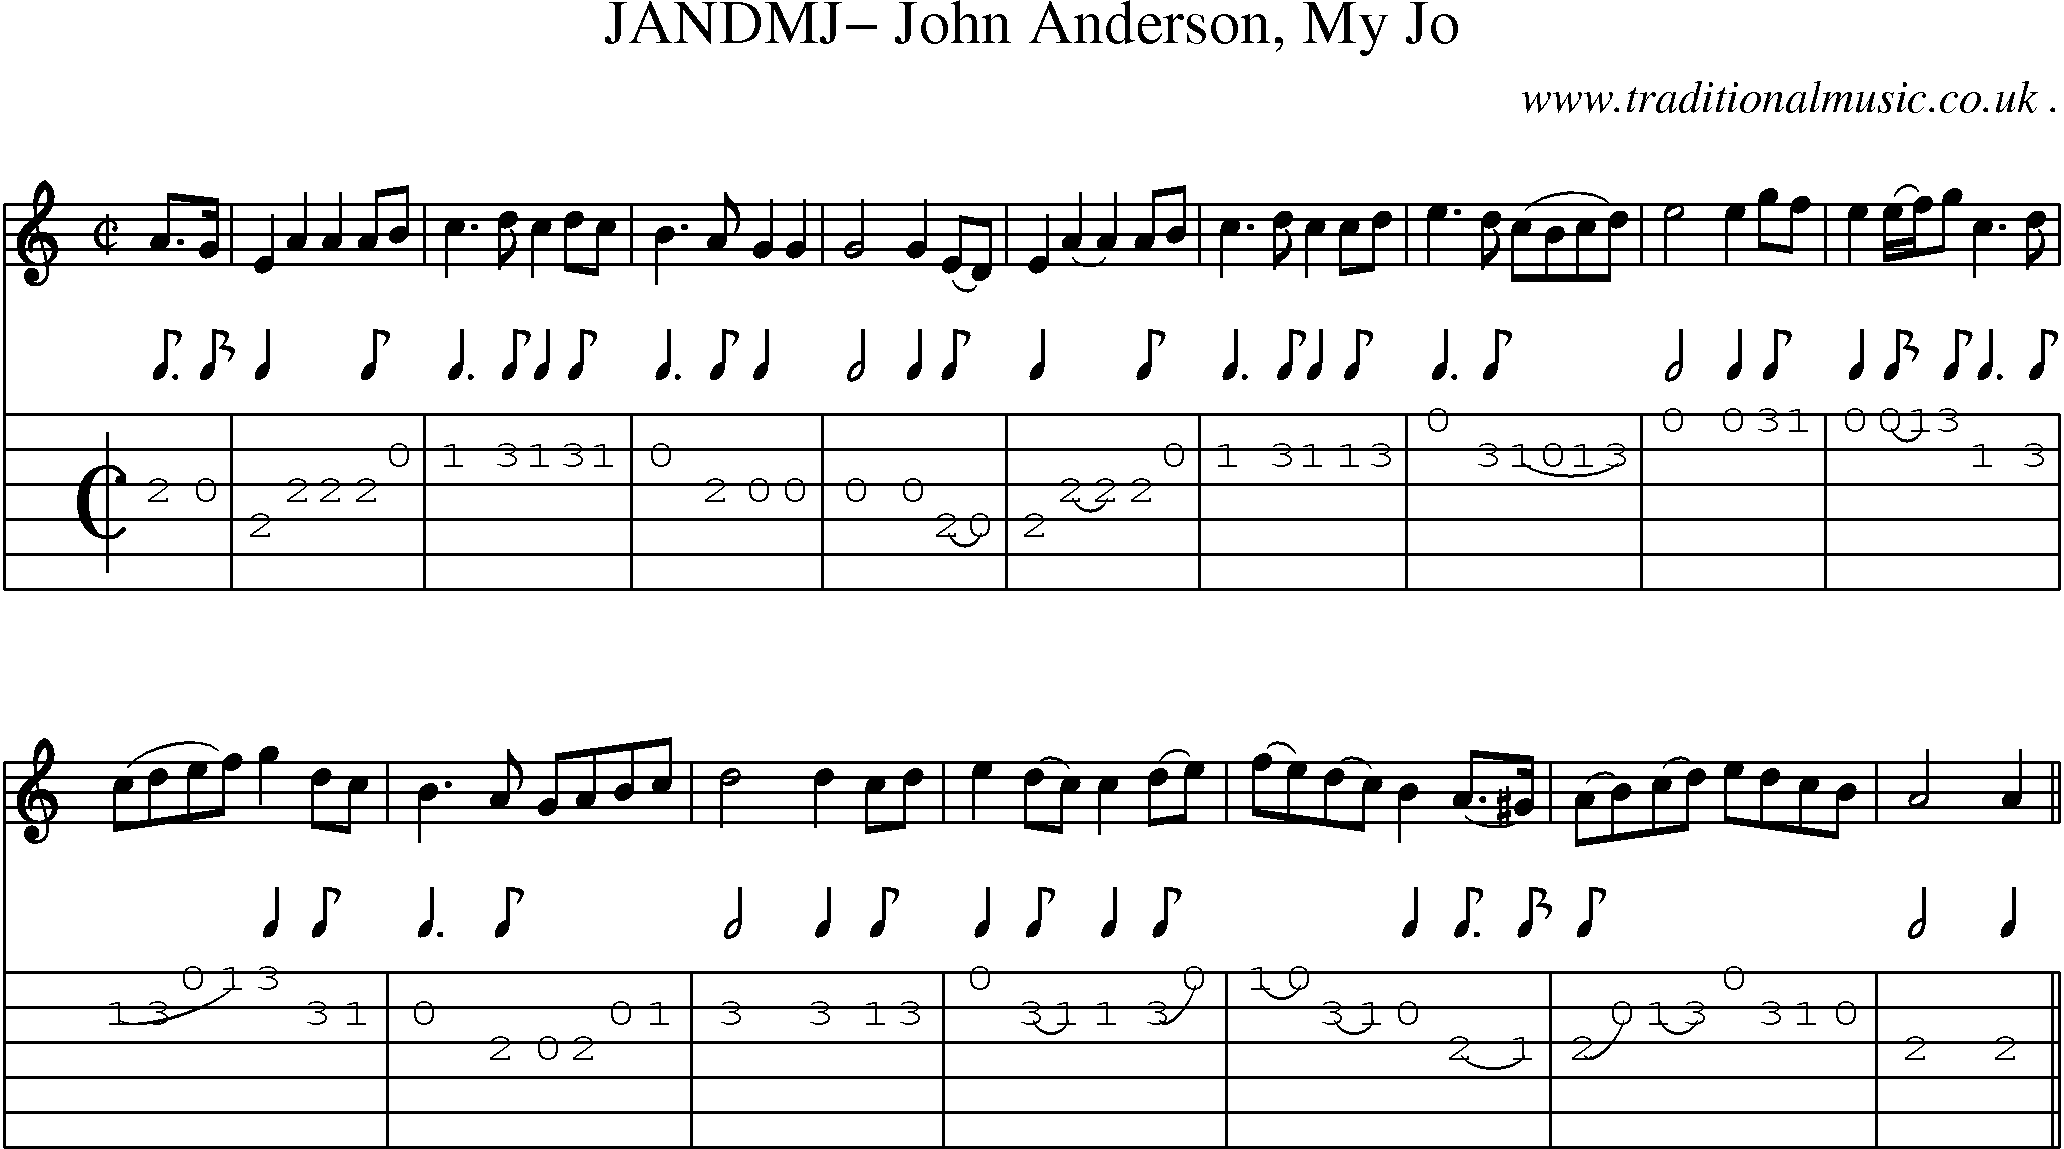 Sheet-Music and Guitar Tabs for Jandmj John Anderson My Jo